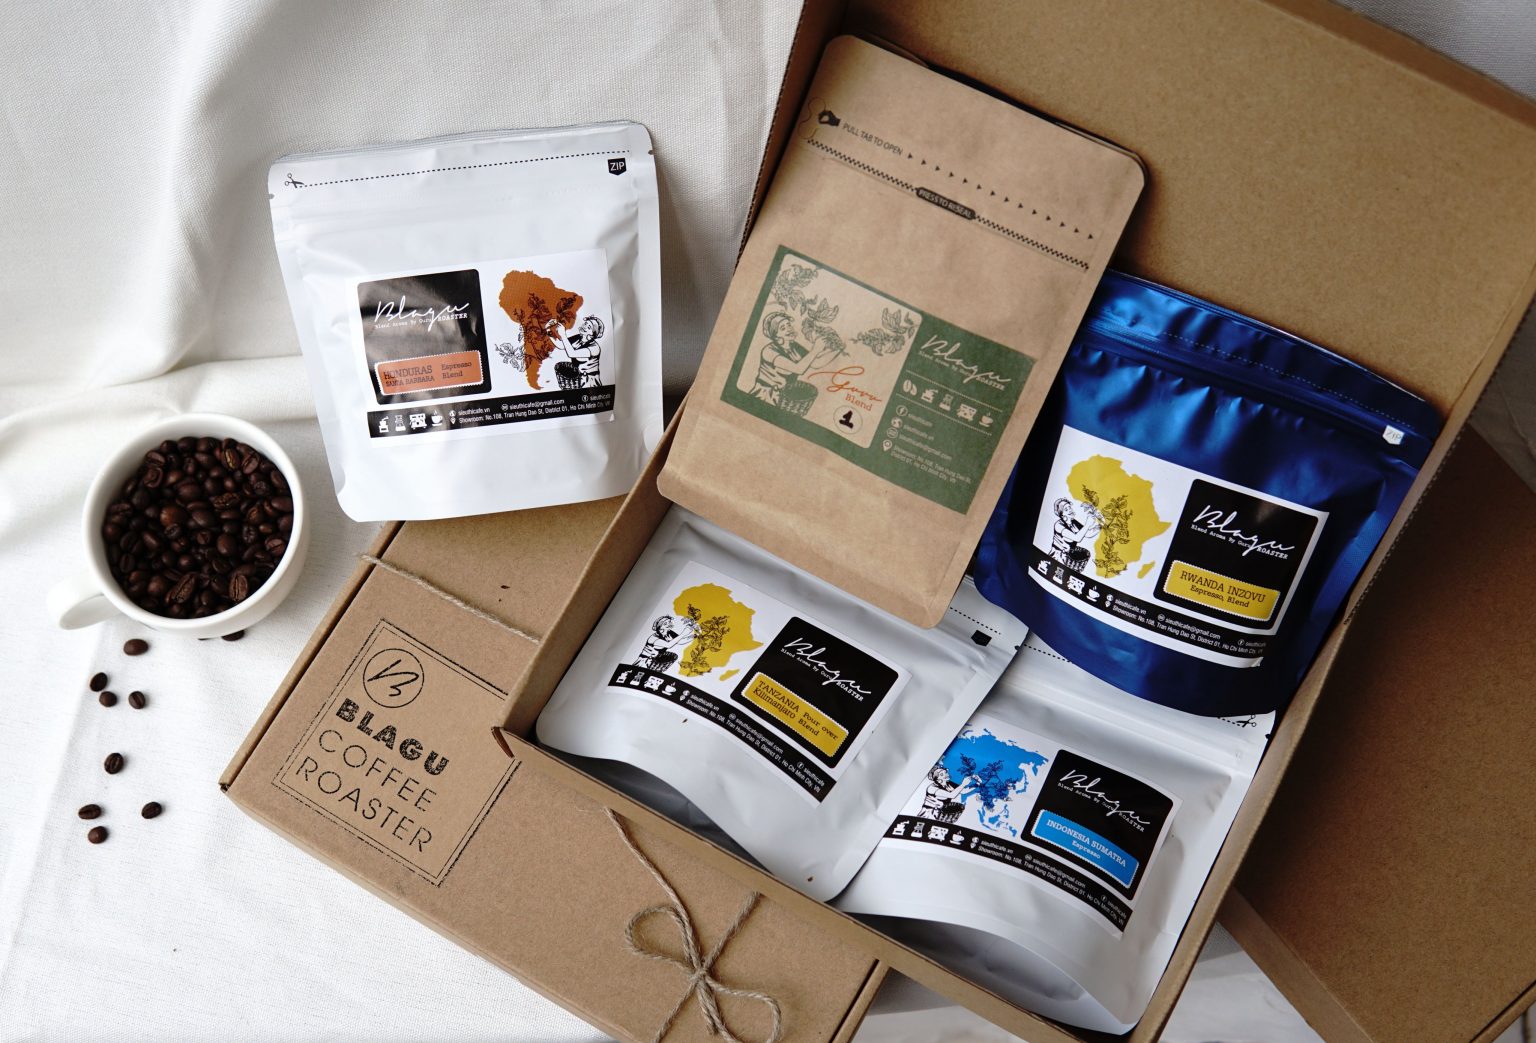 TRẢI NGHIỆM GÓI COFFEE SUBSCRIPTIONS | Sieuthicafe.vn